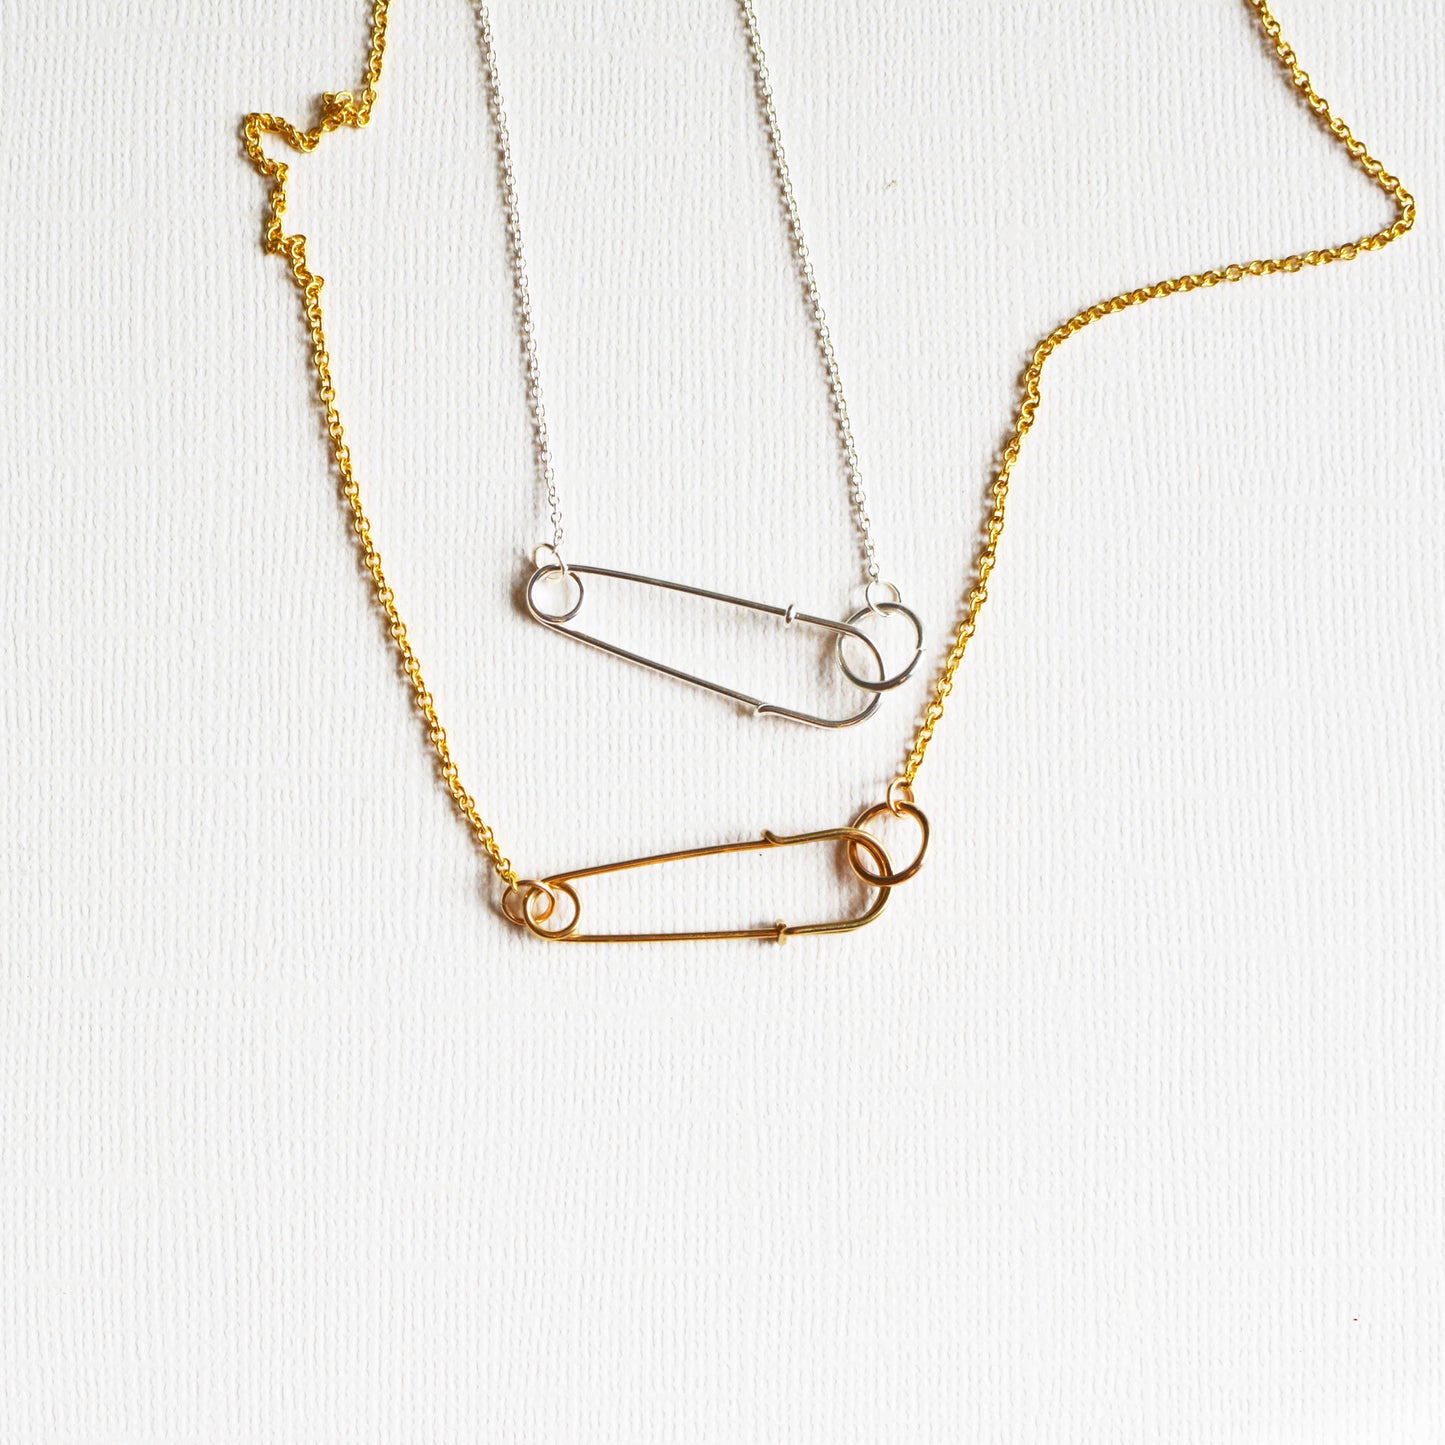 Safety Pin Necklace: Sterling Silver